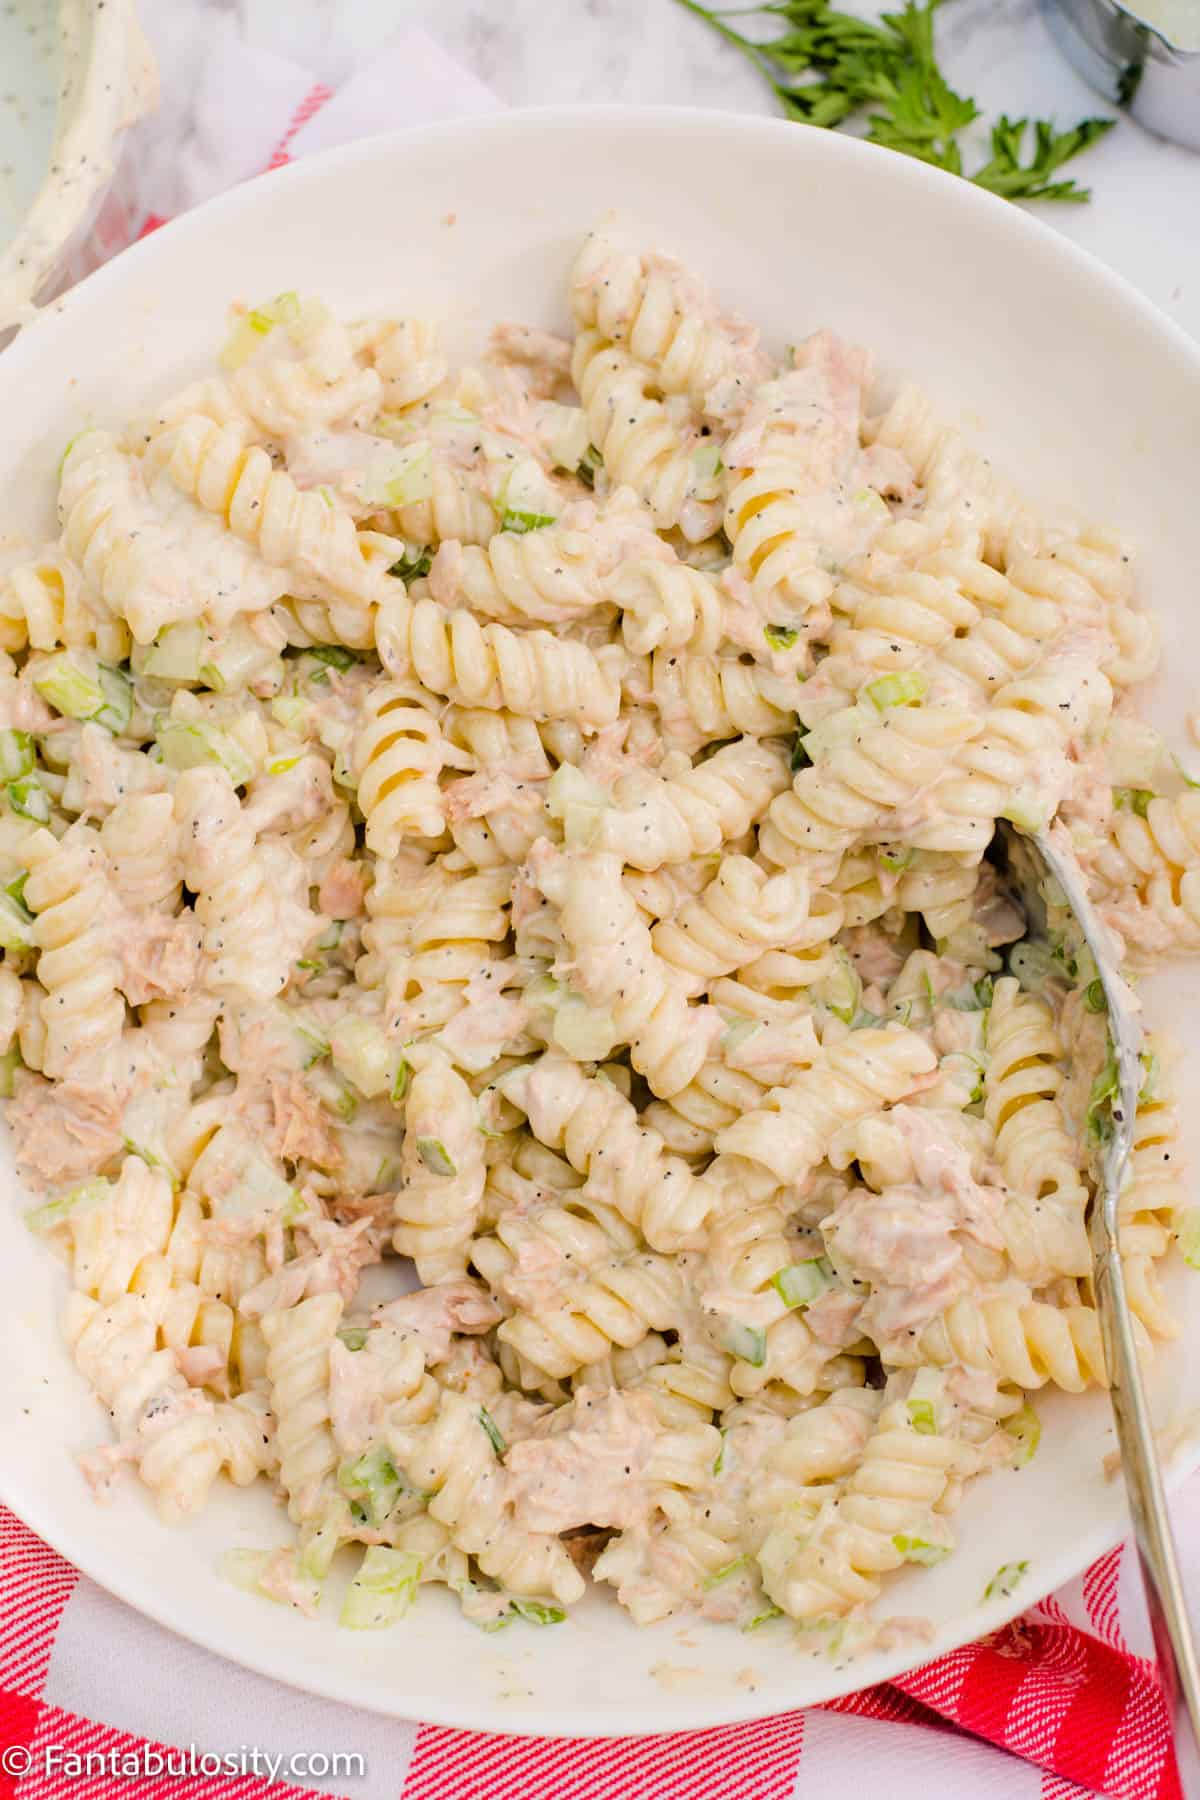 Pasta mixed with mayo and vegetables